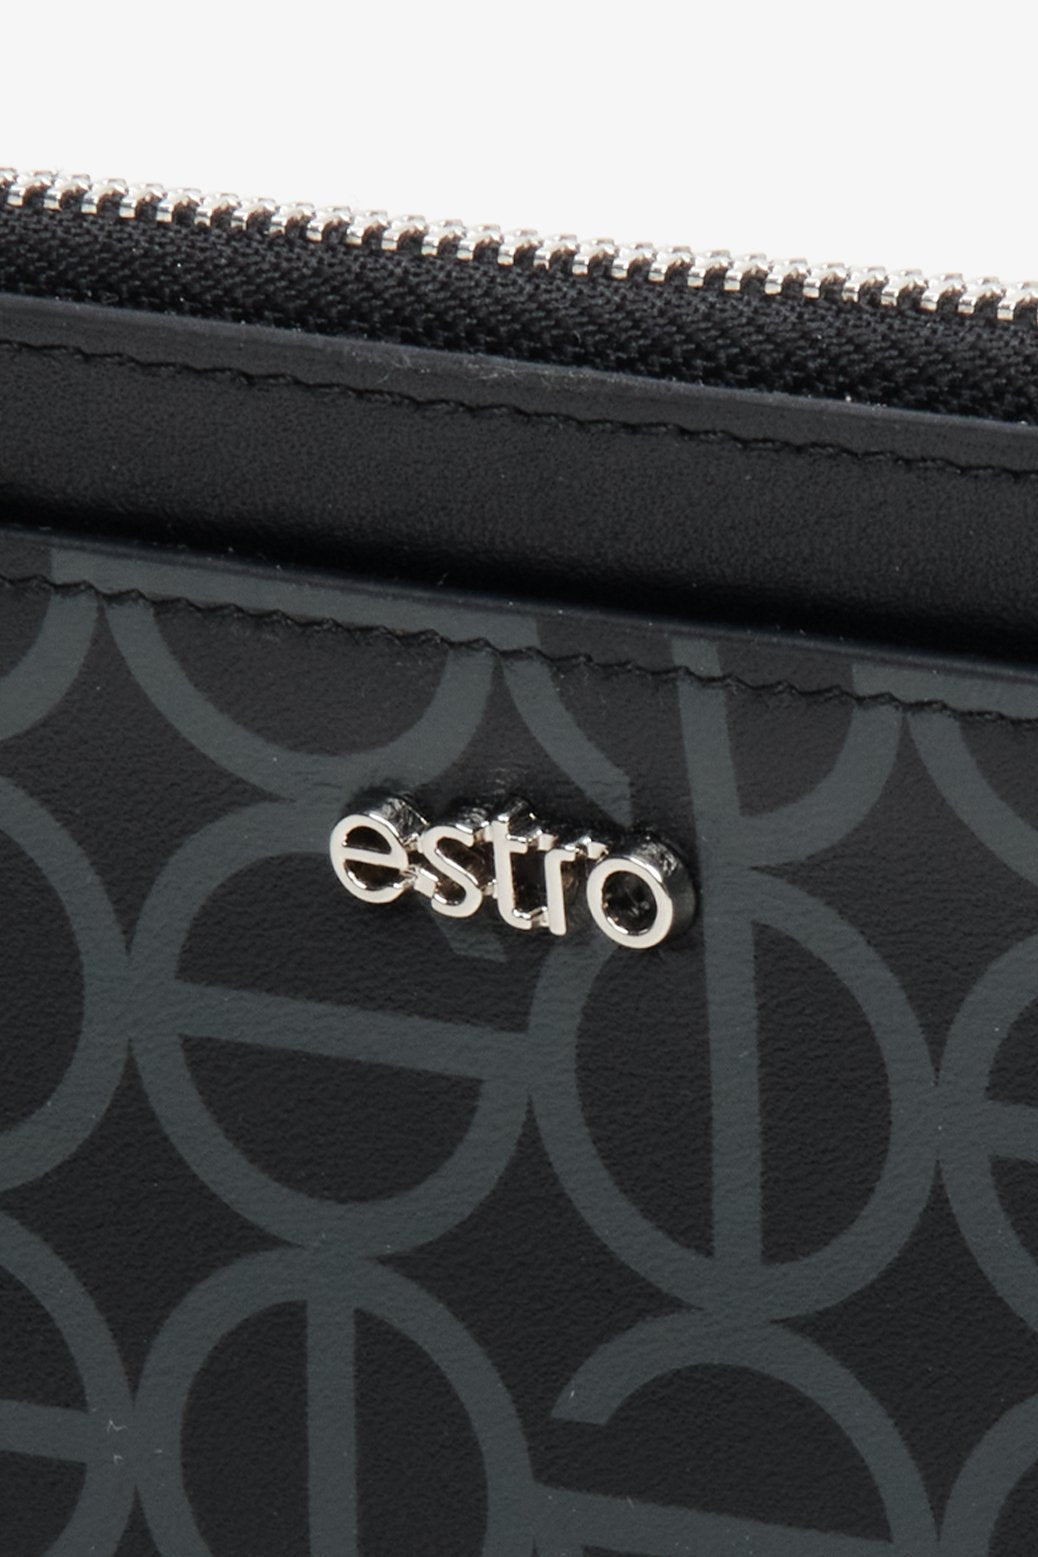 Women's, large black wristlet made of genuine leather by Estro - close-up on the details.